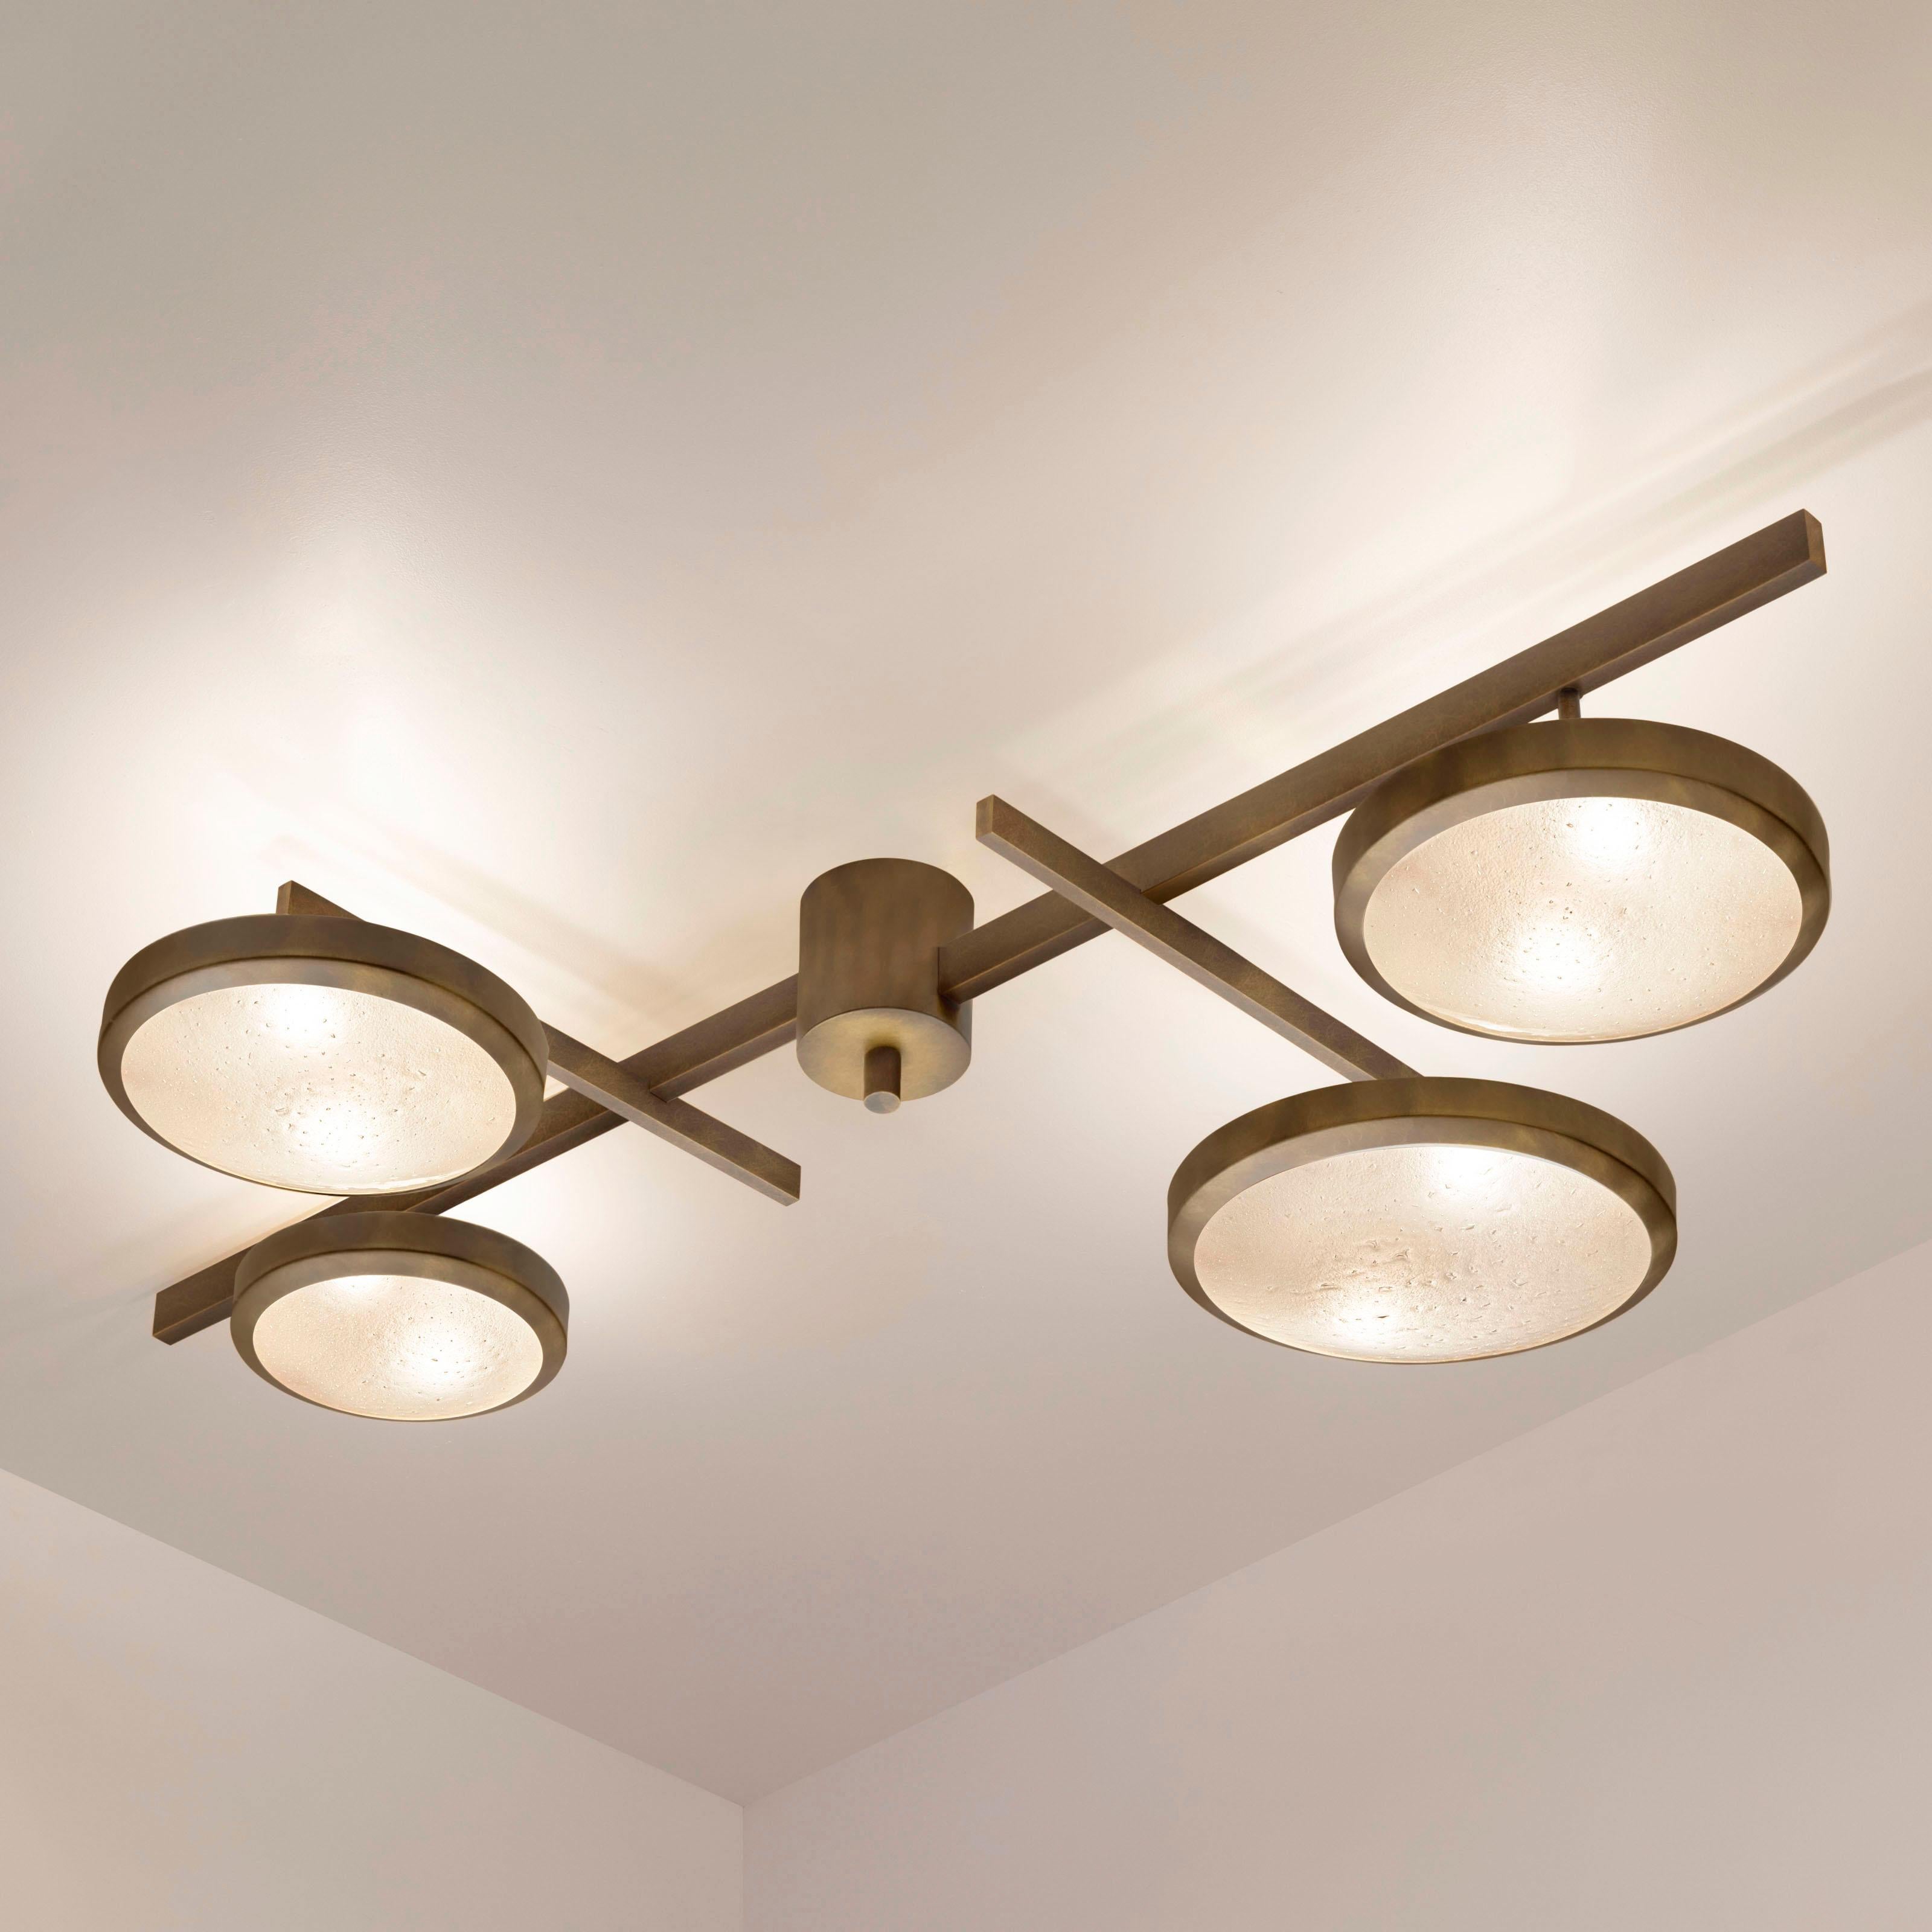 Contemporary Tetrix Ceiling Light by Gaspare Asaro - Satin Brass Finish For Sale